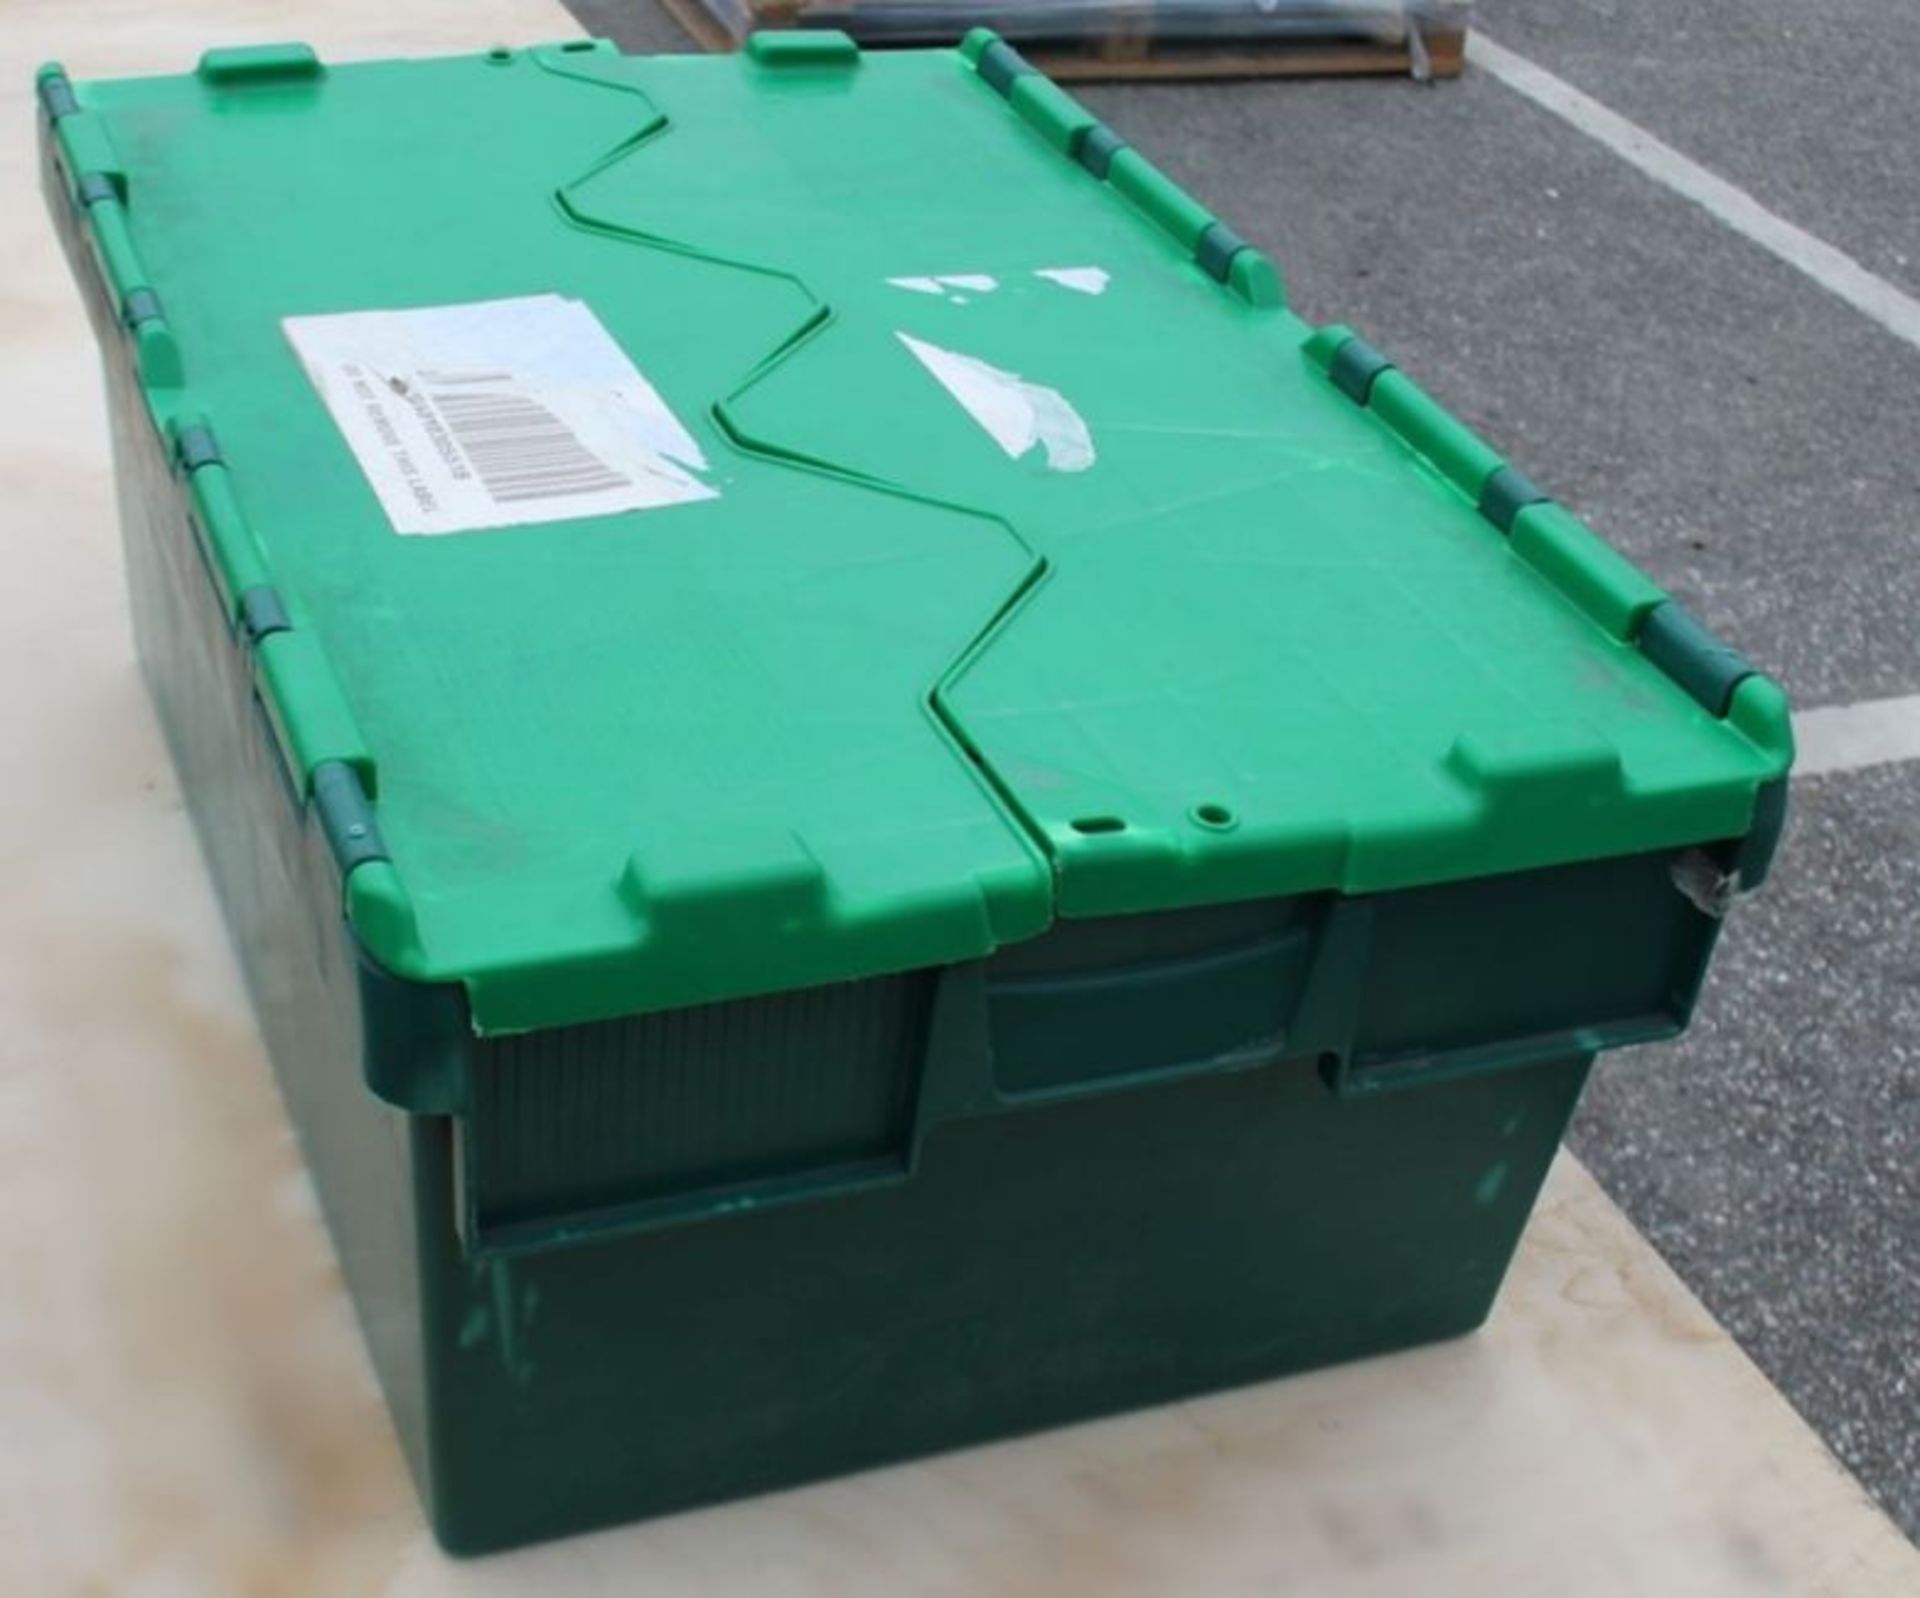 20 x Robust Low Profile Green Plastic Secure Storage Boxes With Attached Hinged Lids - Dimensions: - Image 5 of 7